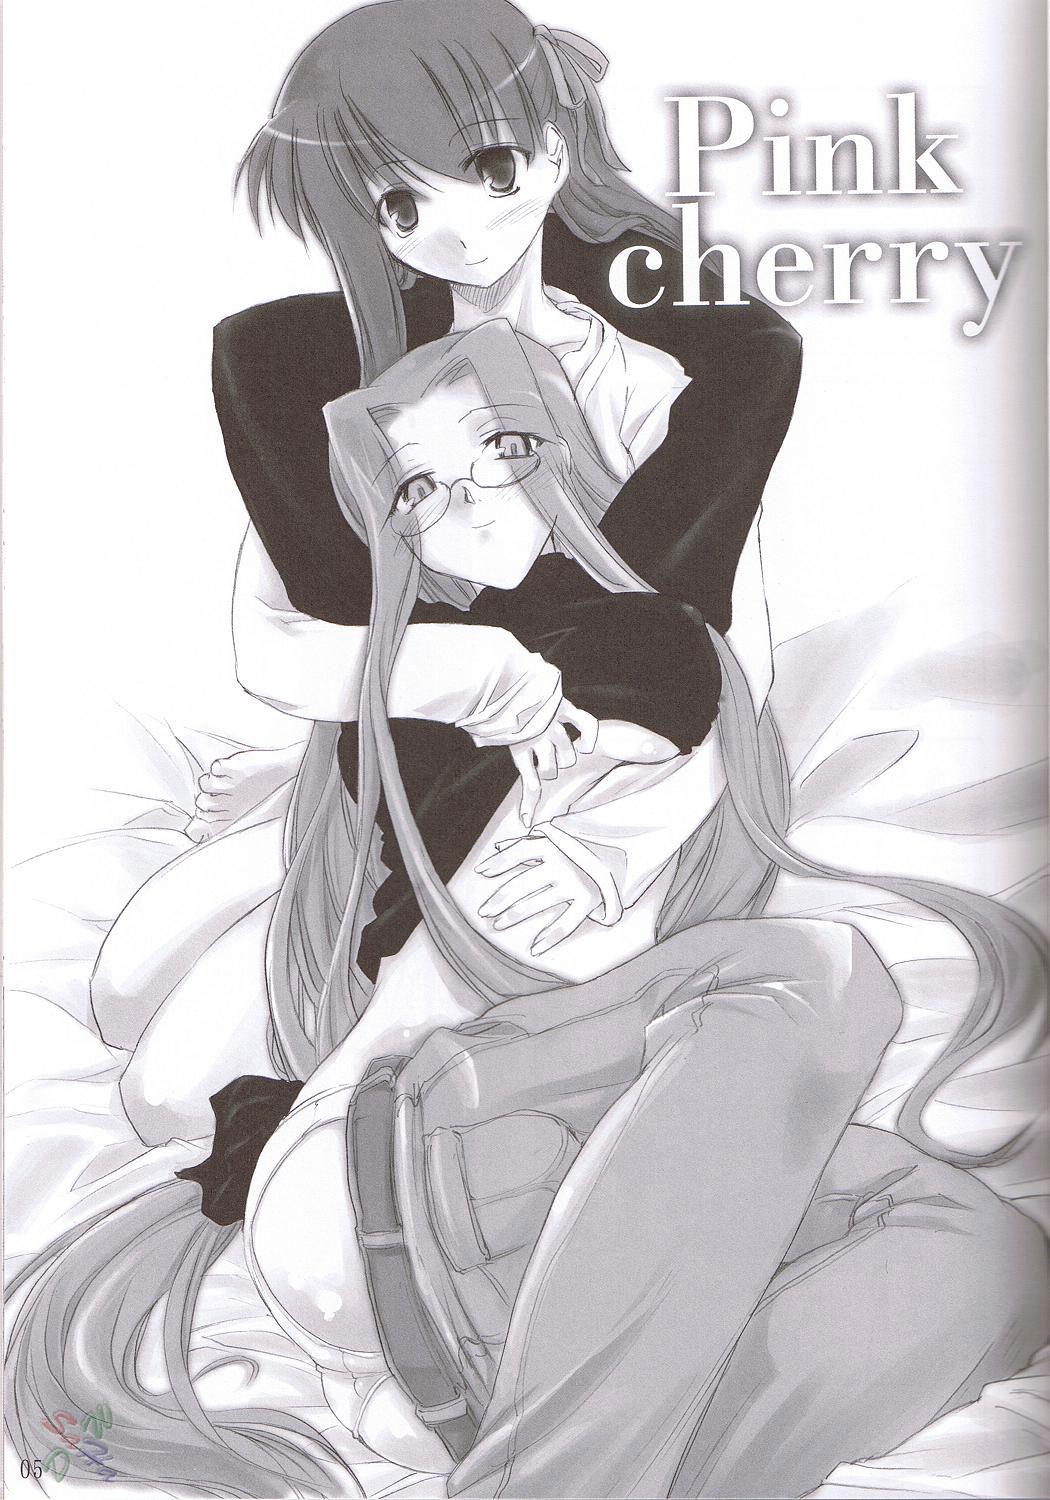 India Pink Cherry - Fate stay night 1080p - Page 4